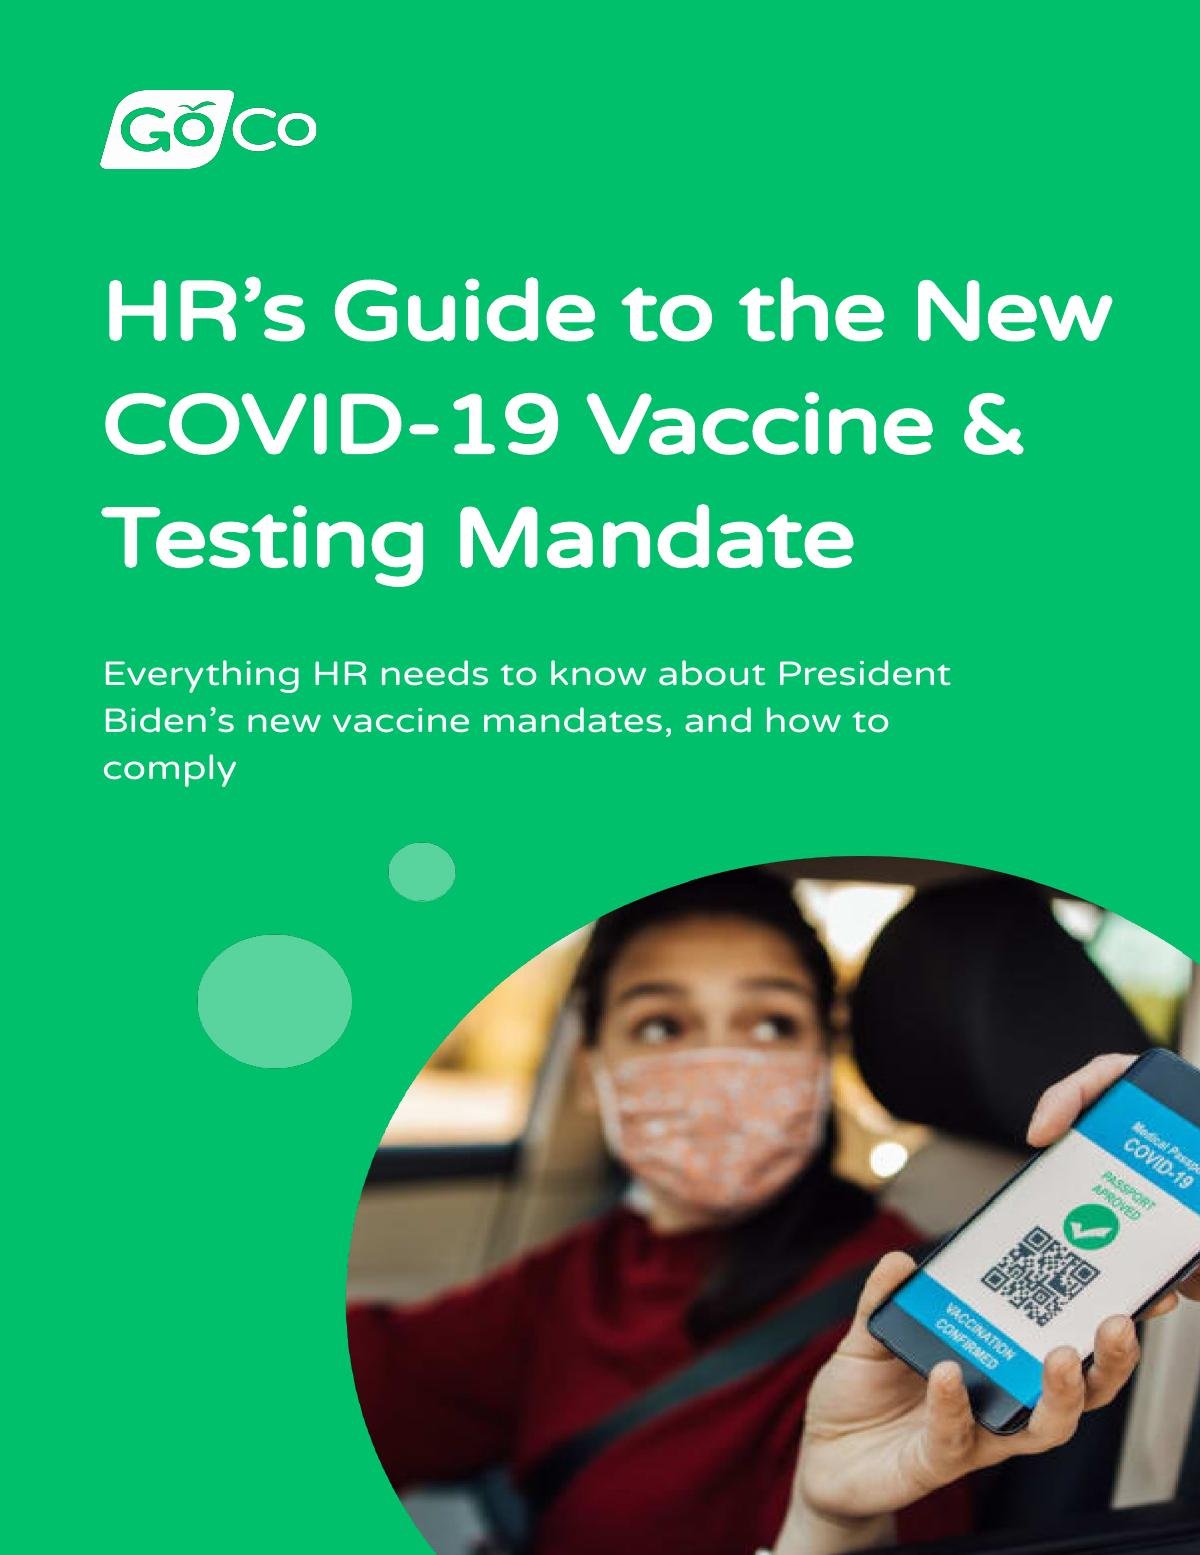 HR’s Guide to the New COVID-19 Vaccine & Testing Mandate